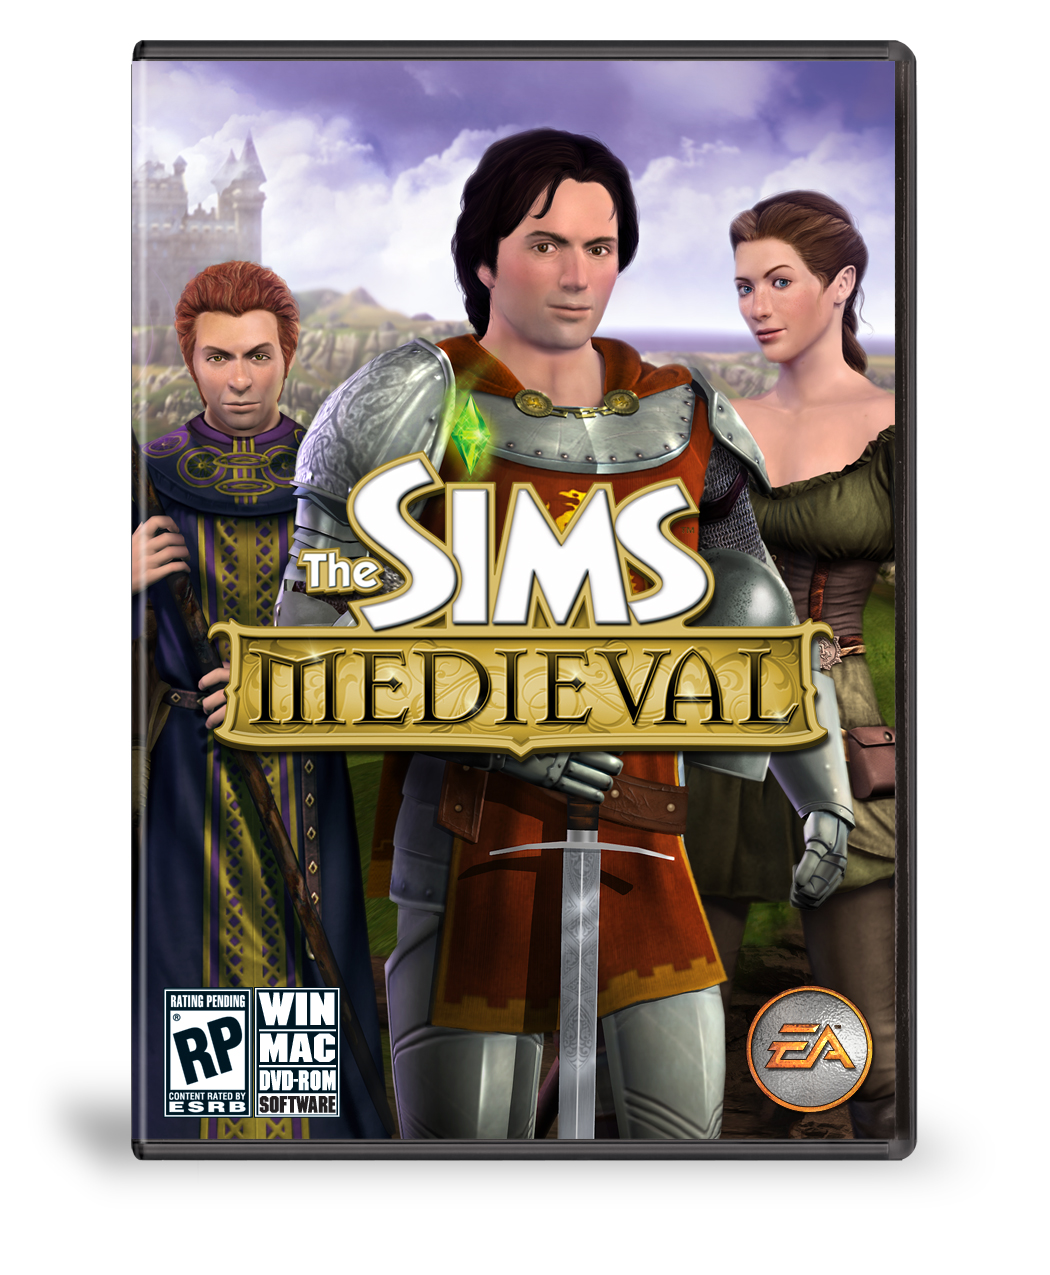 the sims medieval deluxe download